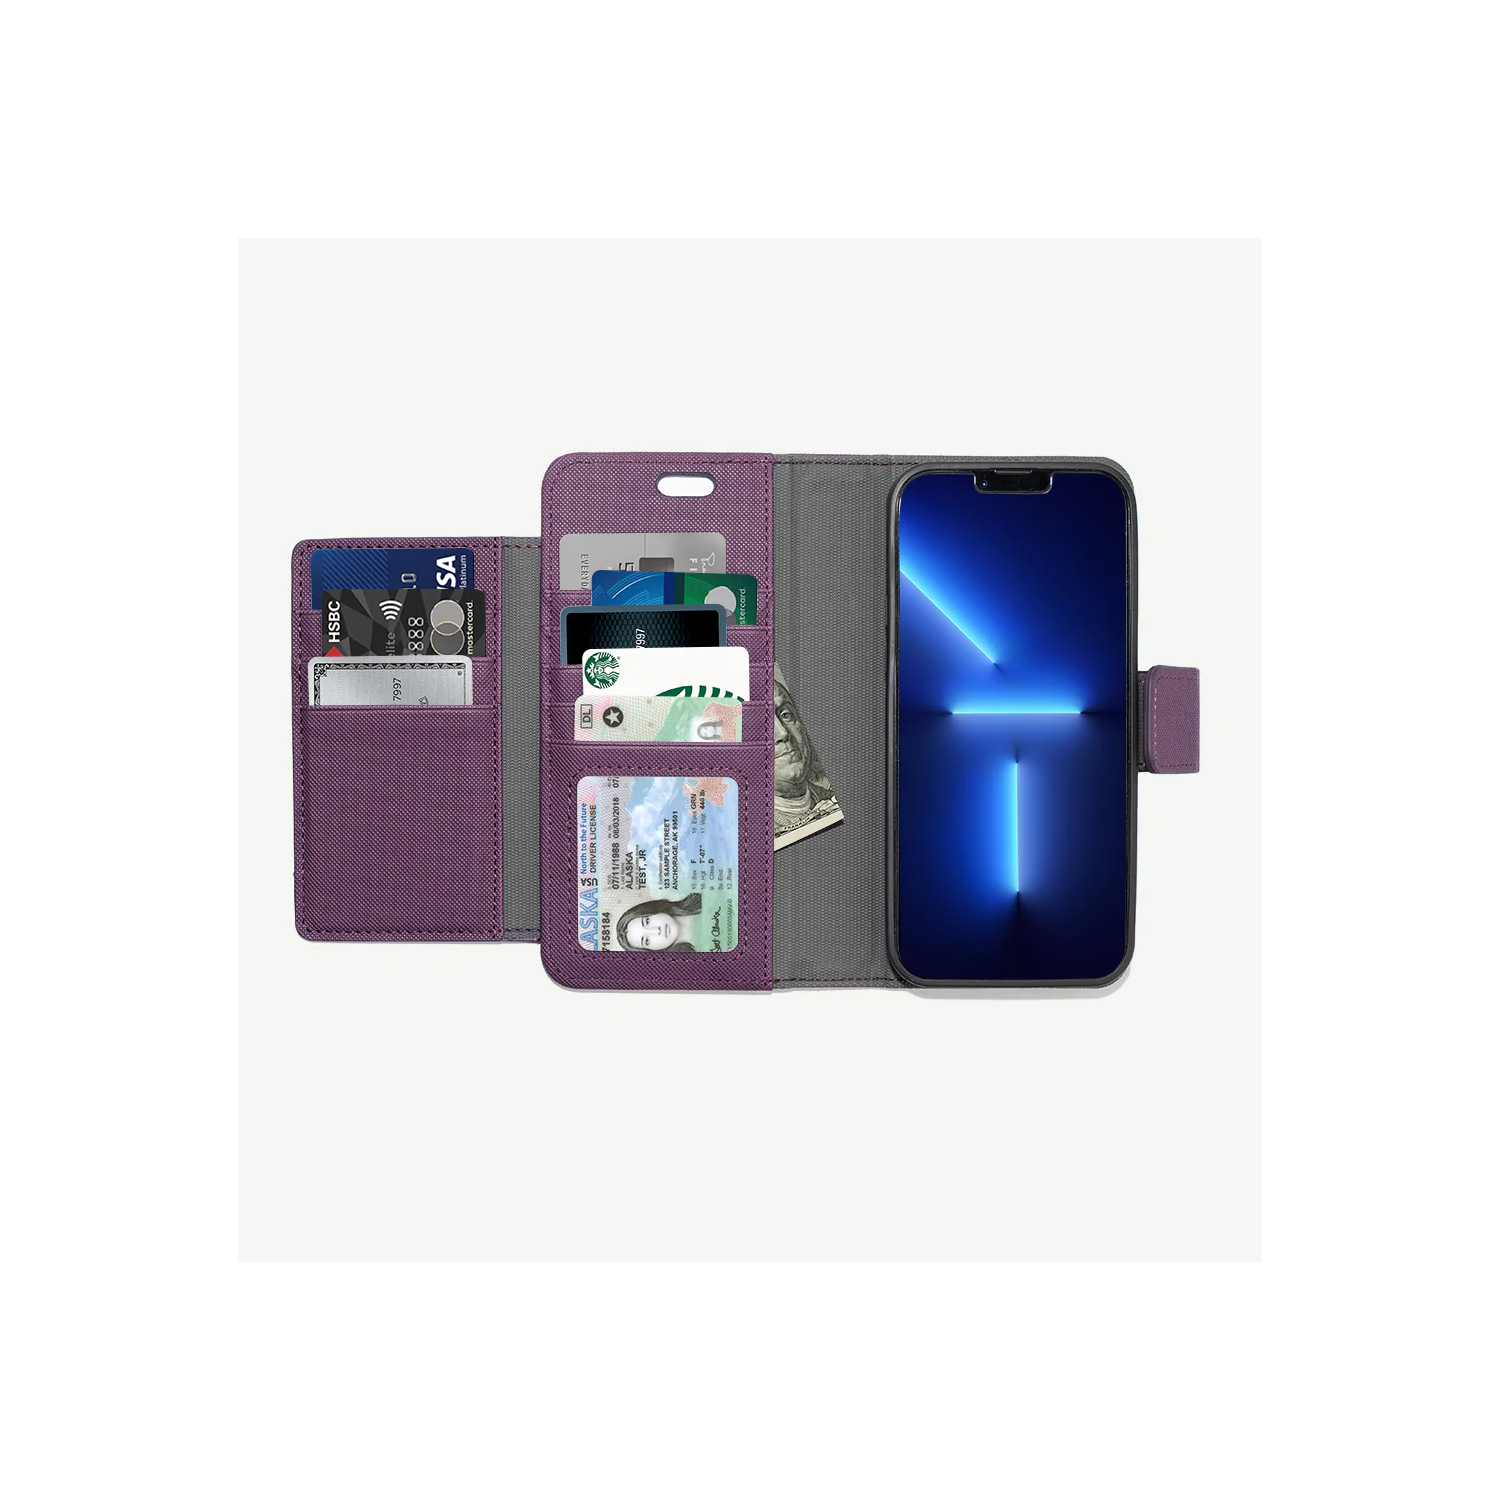 Caseco iPhone 12 Pro Max MagSafe Wallet Case - Sunset Blvd, Purple